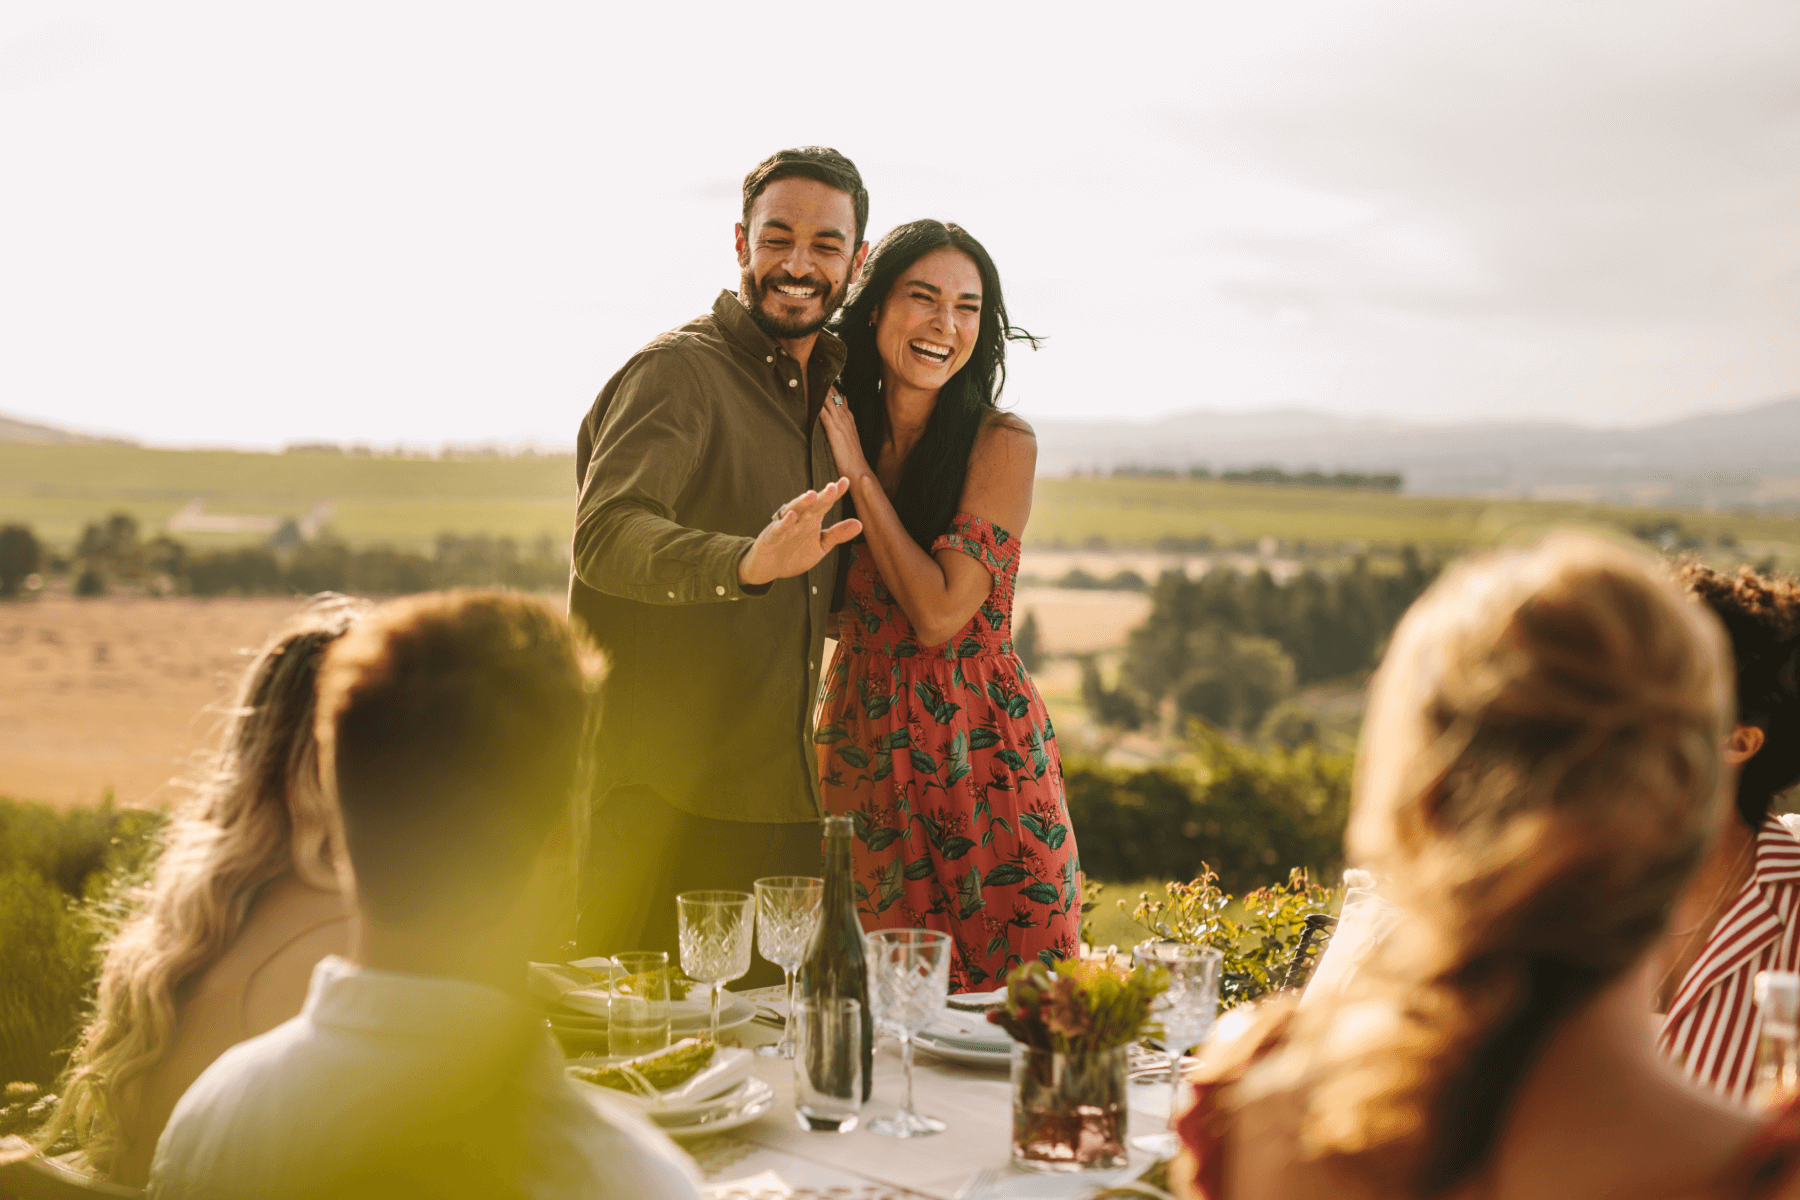 A happy couple laughs and hugs in front of a table of friends set in a rustic area.